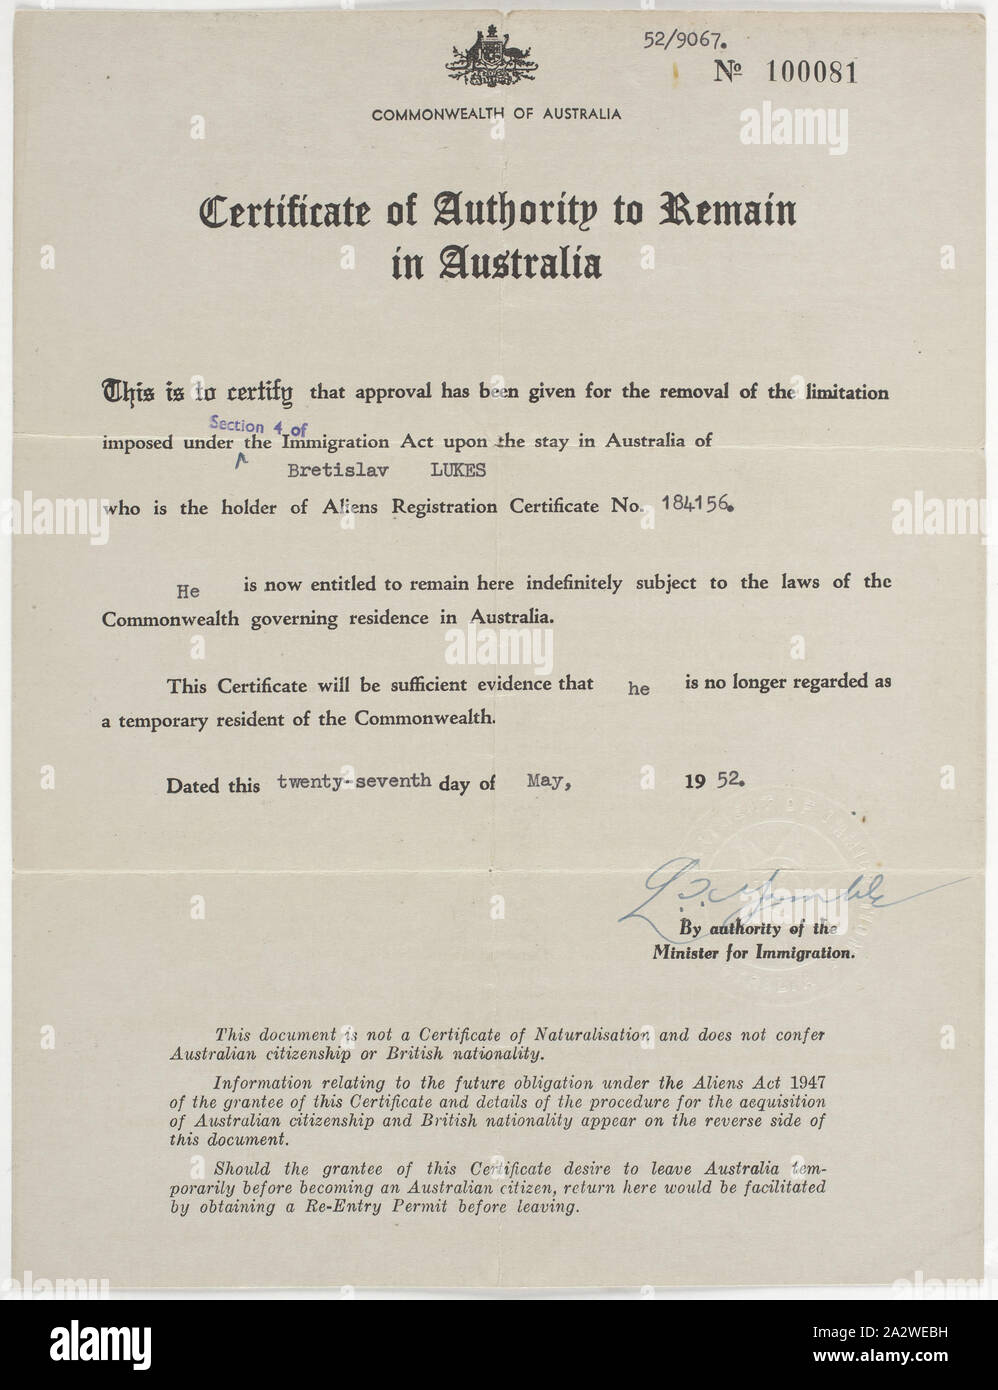 Certificate - Authority to Remain in Australia, Issued to Bretislav Lukes, Commonwealth of Australia, 27 May 1952, Certificate of Authority to Remain in Australia, issued by the Commonwealth of Australia to Bretislav Lukes on 27 May 1952. This documents certifies that Bretislav has permanent residency status in Australia. Bretislav was born 12 January 1922 in Stankou in Czechoslovakia. He claims to have worked for the Germans during the war in Junkers aircraft factory. Following the war he trained as an Stock Photo